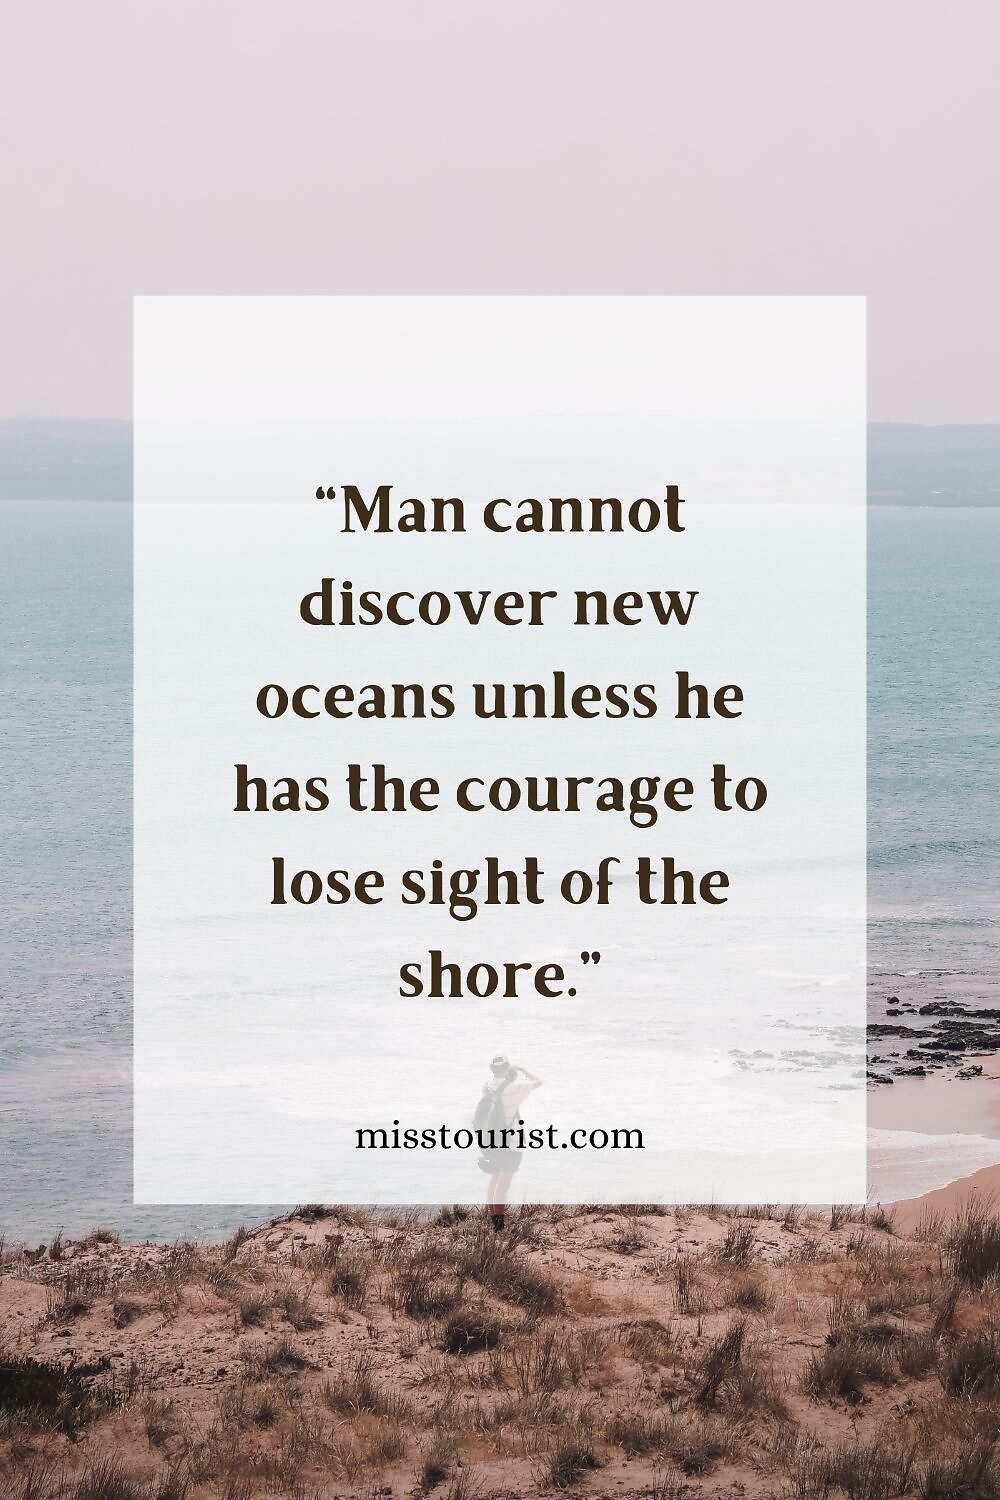 Image of a person standing by the sea with the quote "Man cannot discover new oceans unless he has the courage to lose sight of the shore." and the website "misstourist.com" displayed on the image.